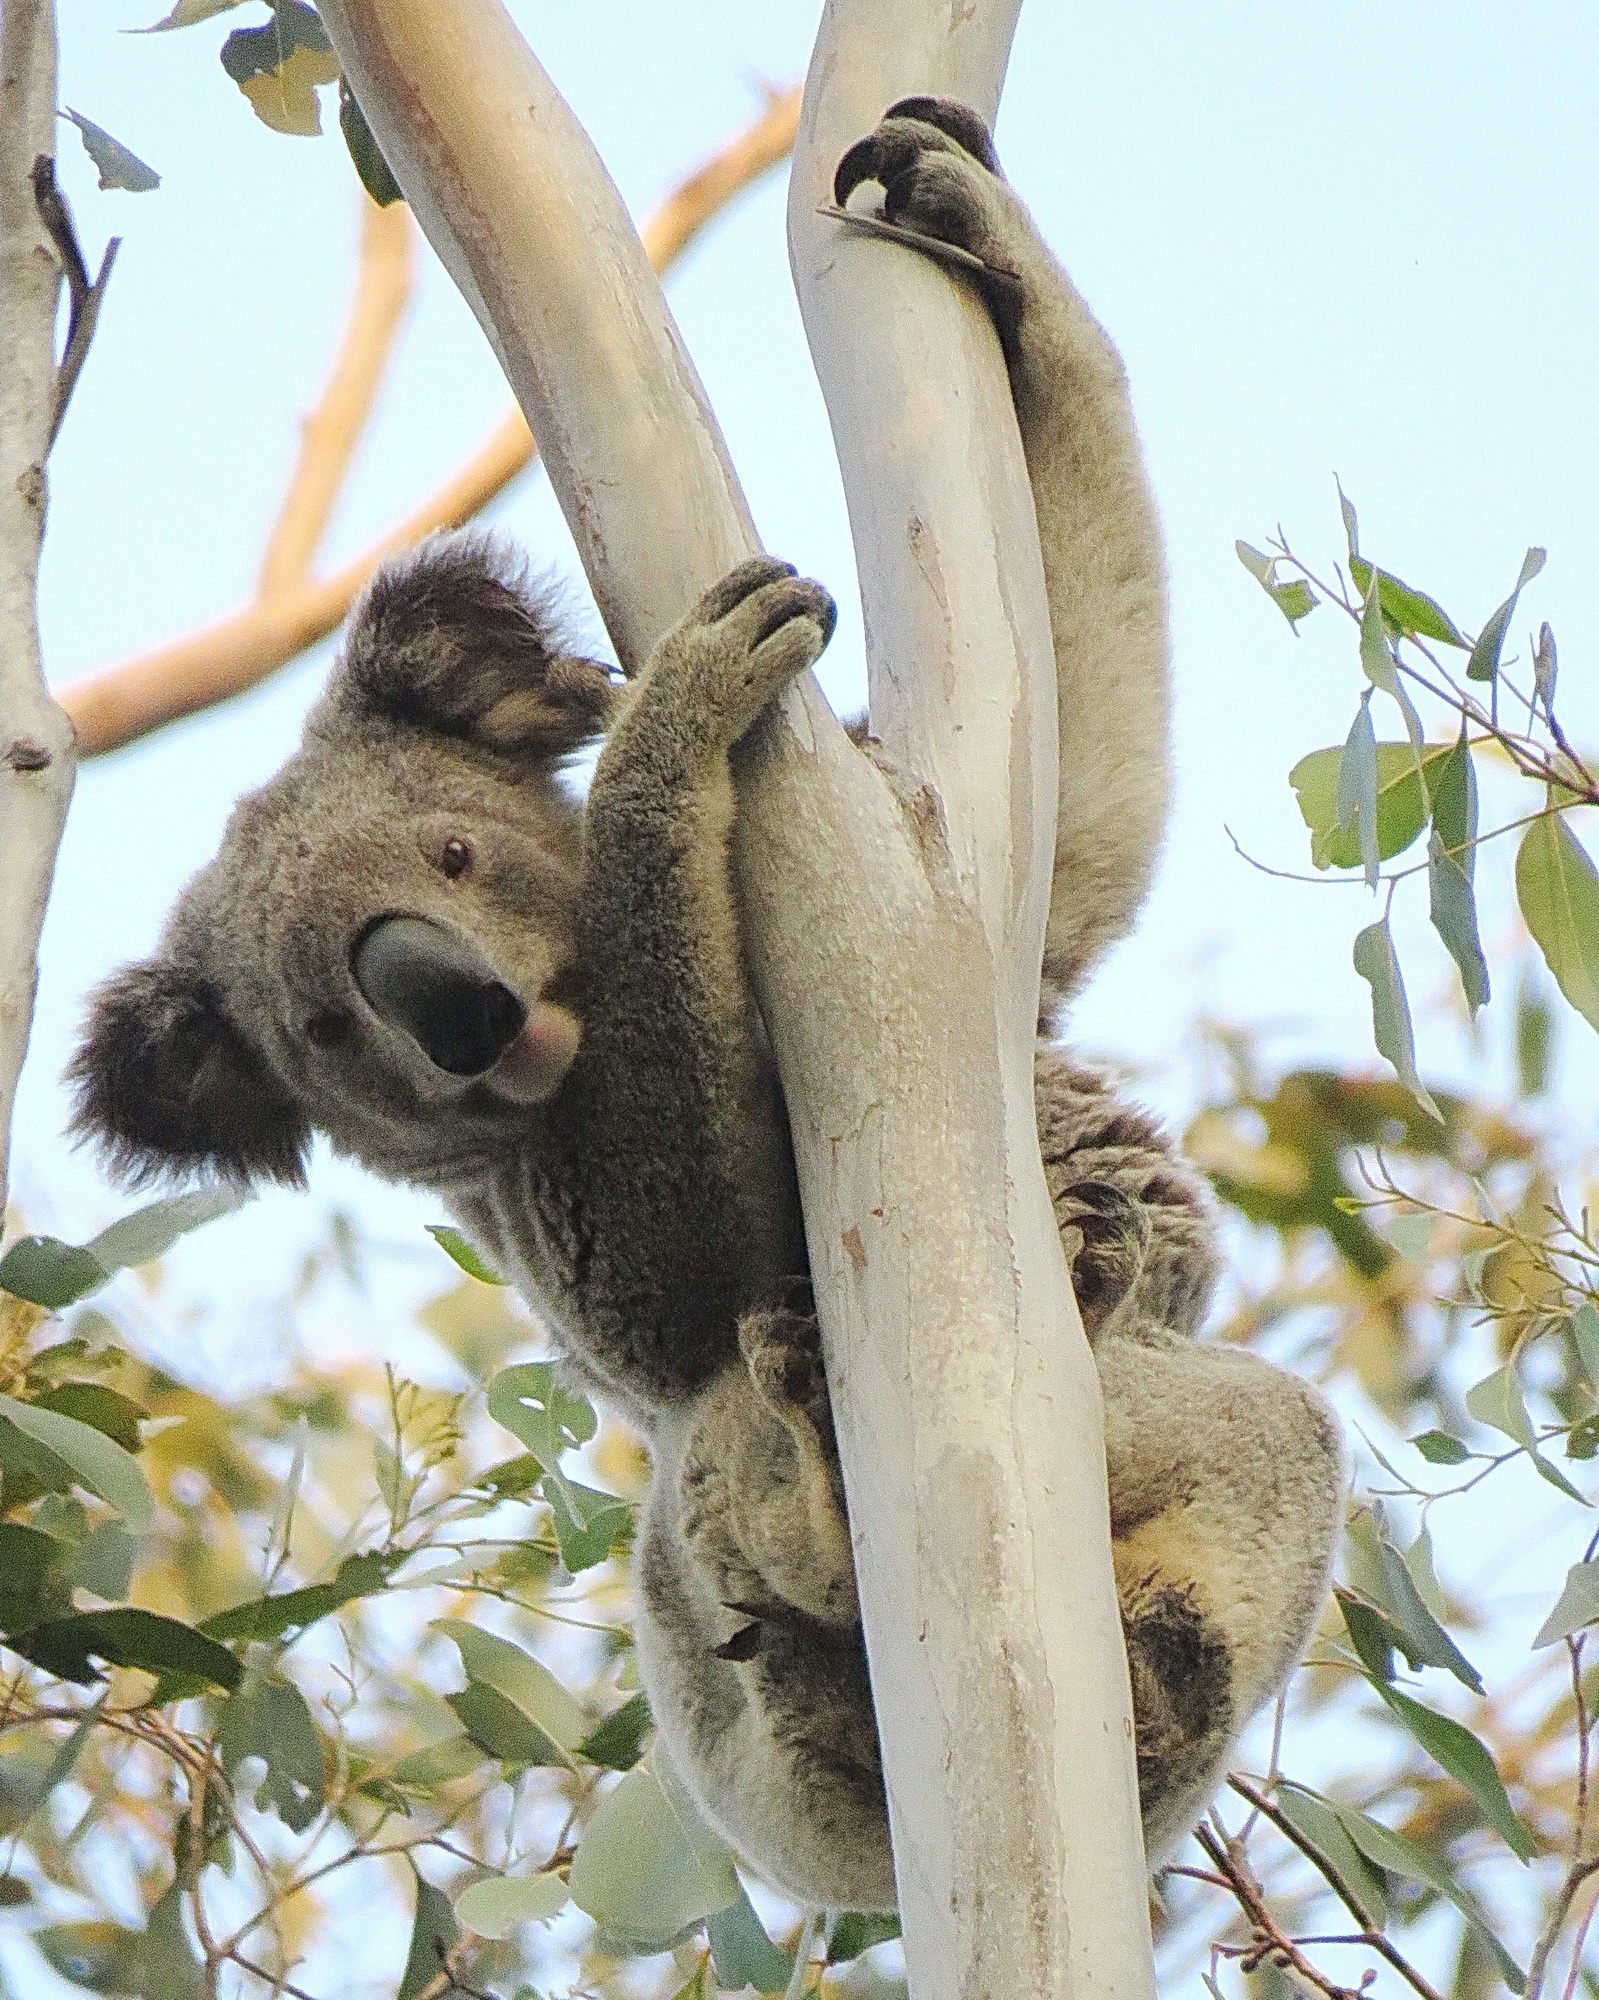 How long have koalas been in Australia? How long can they last? PHOTO Dailan Pugh